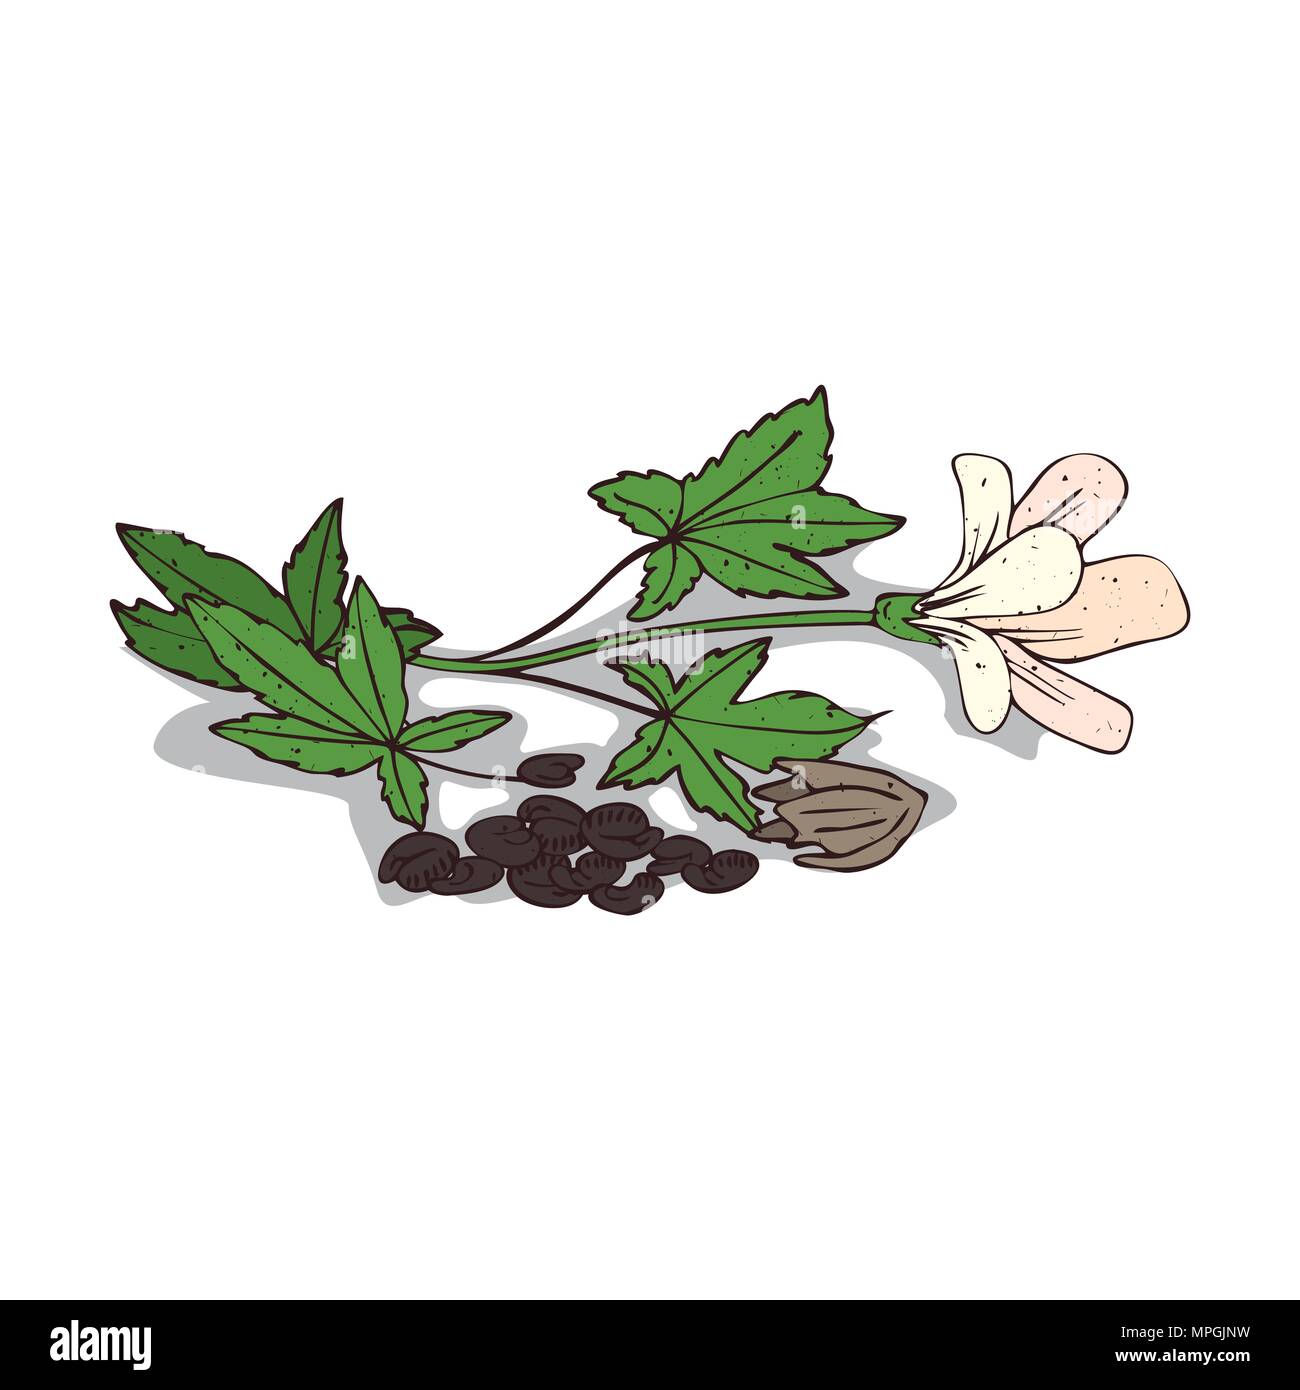 Isolated clipart of plant Kenaf on white background. Botanical drawing of herb Hibiscus cannabinus with seeds and flowers, leaves Stock Vector